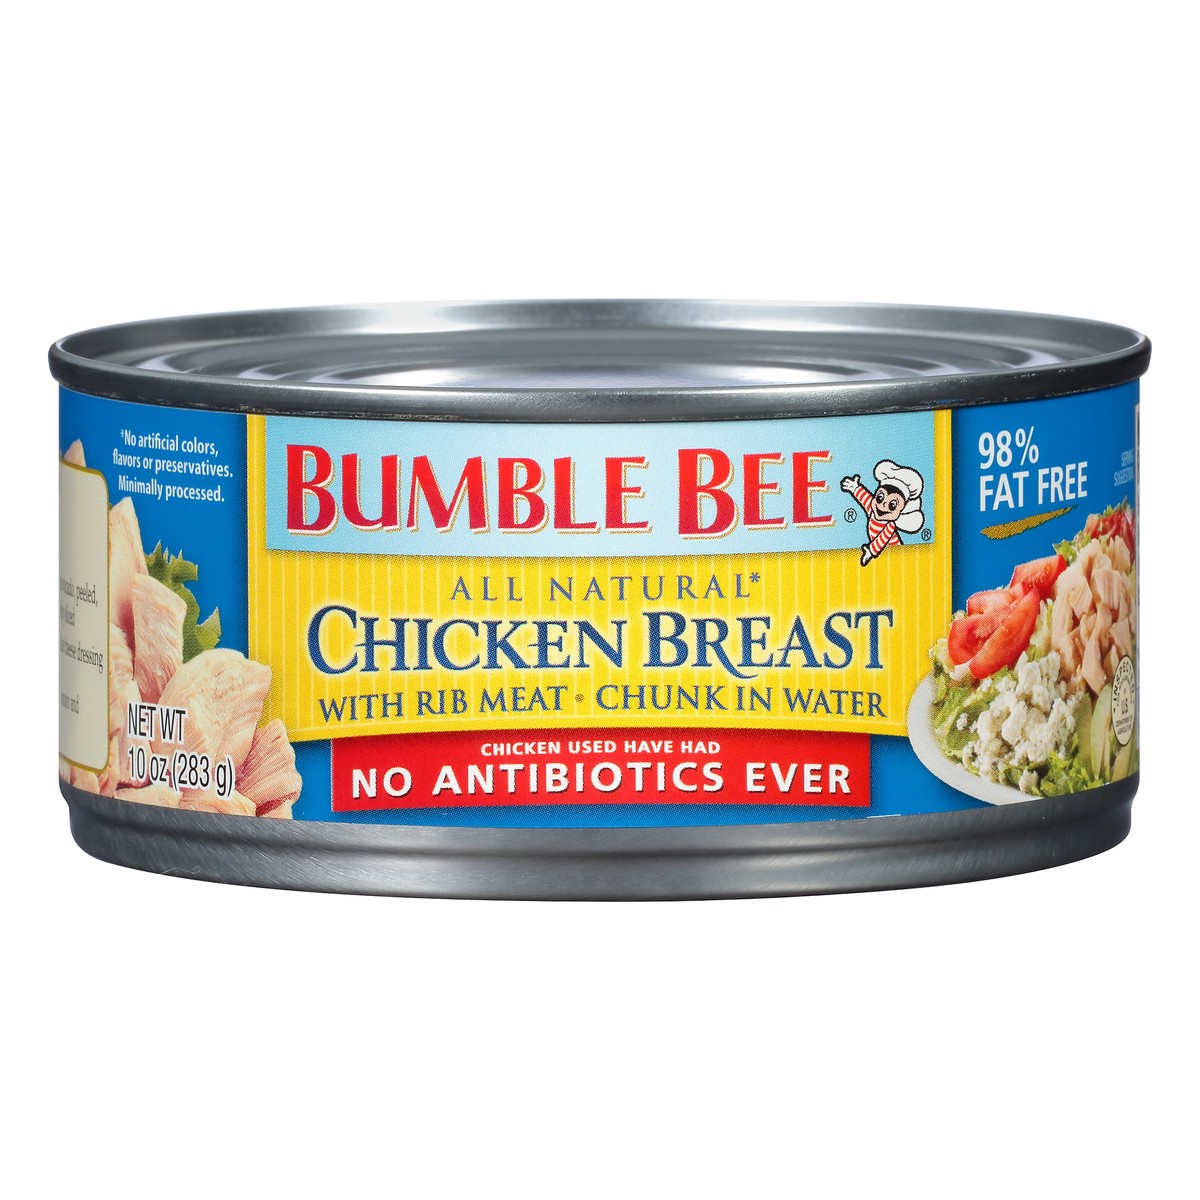 slide 11 of 11, Bumble Bee All Natural Chicken Breast with Rib Meat Chunk in Water Chicken Breas, 10 oz